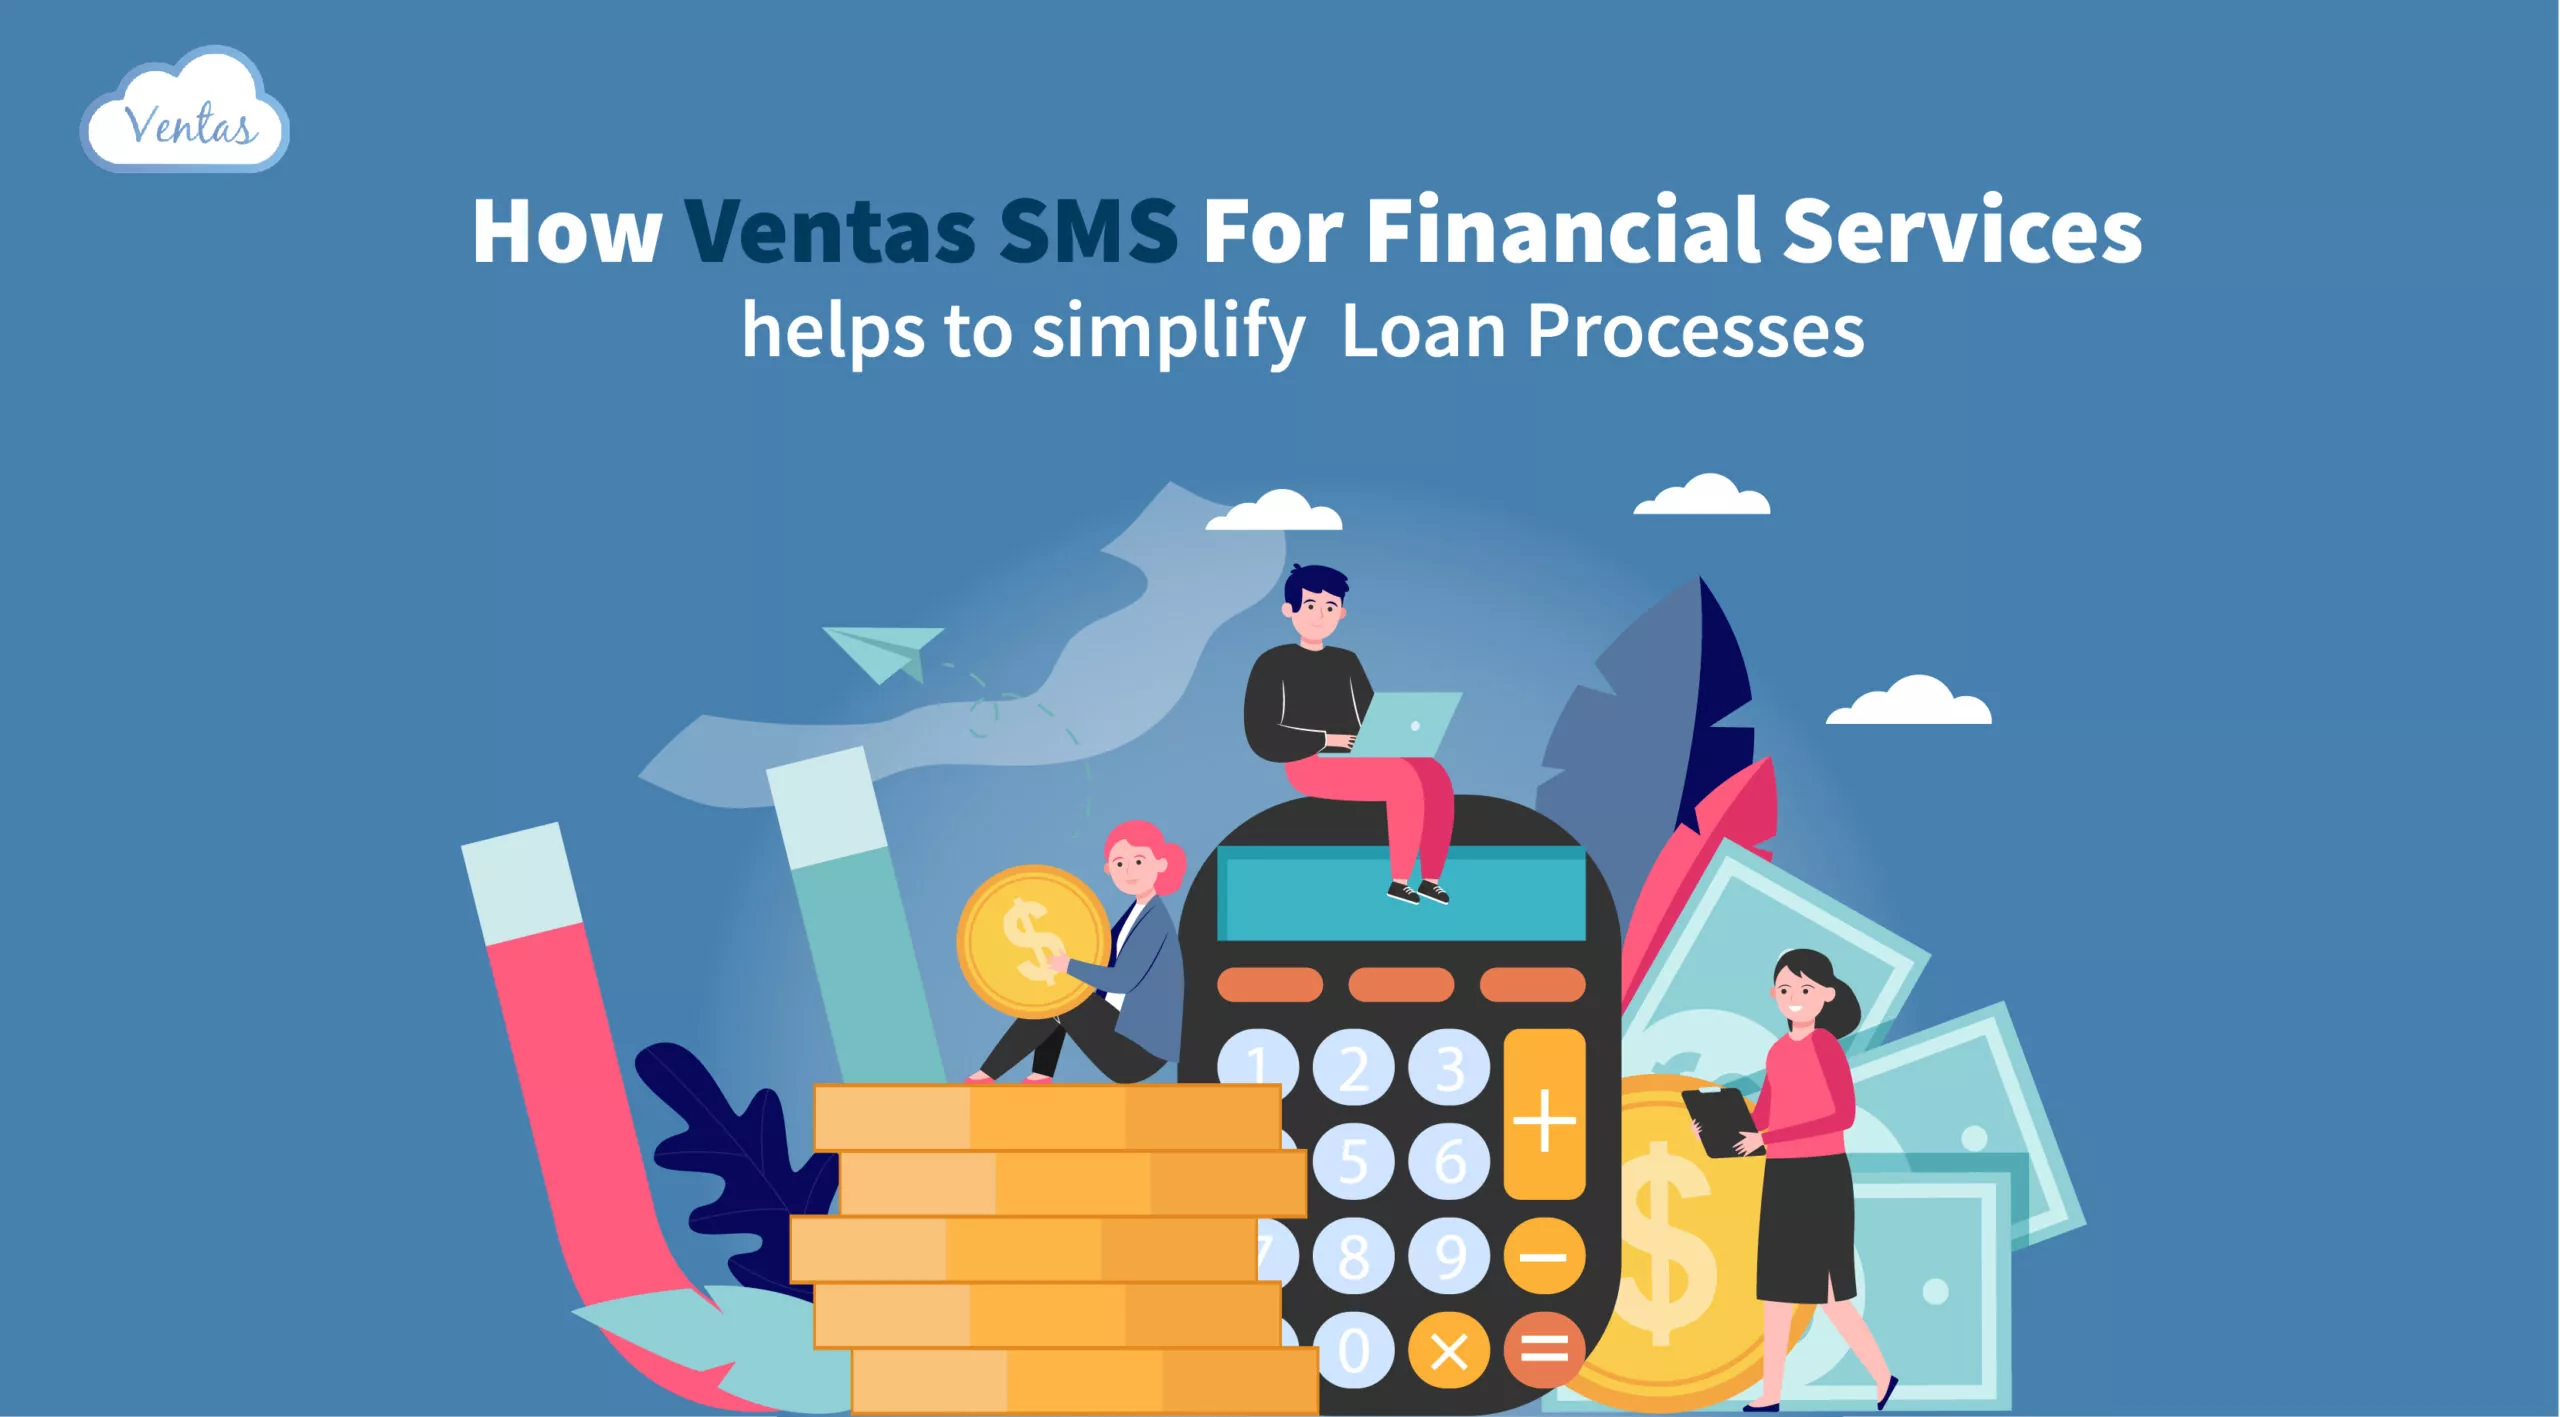 Faster communications with Ventas SMS for Financial Cloud